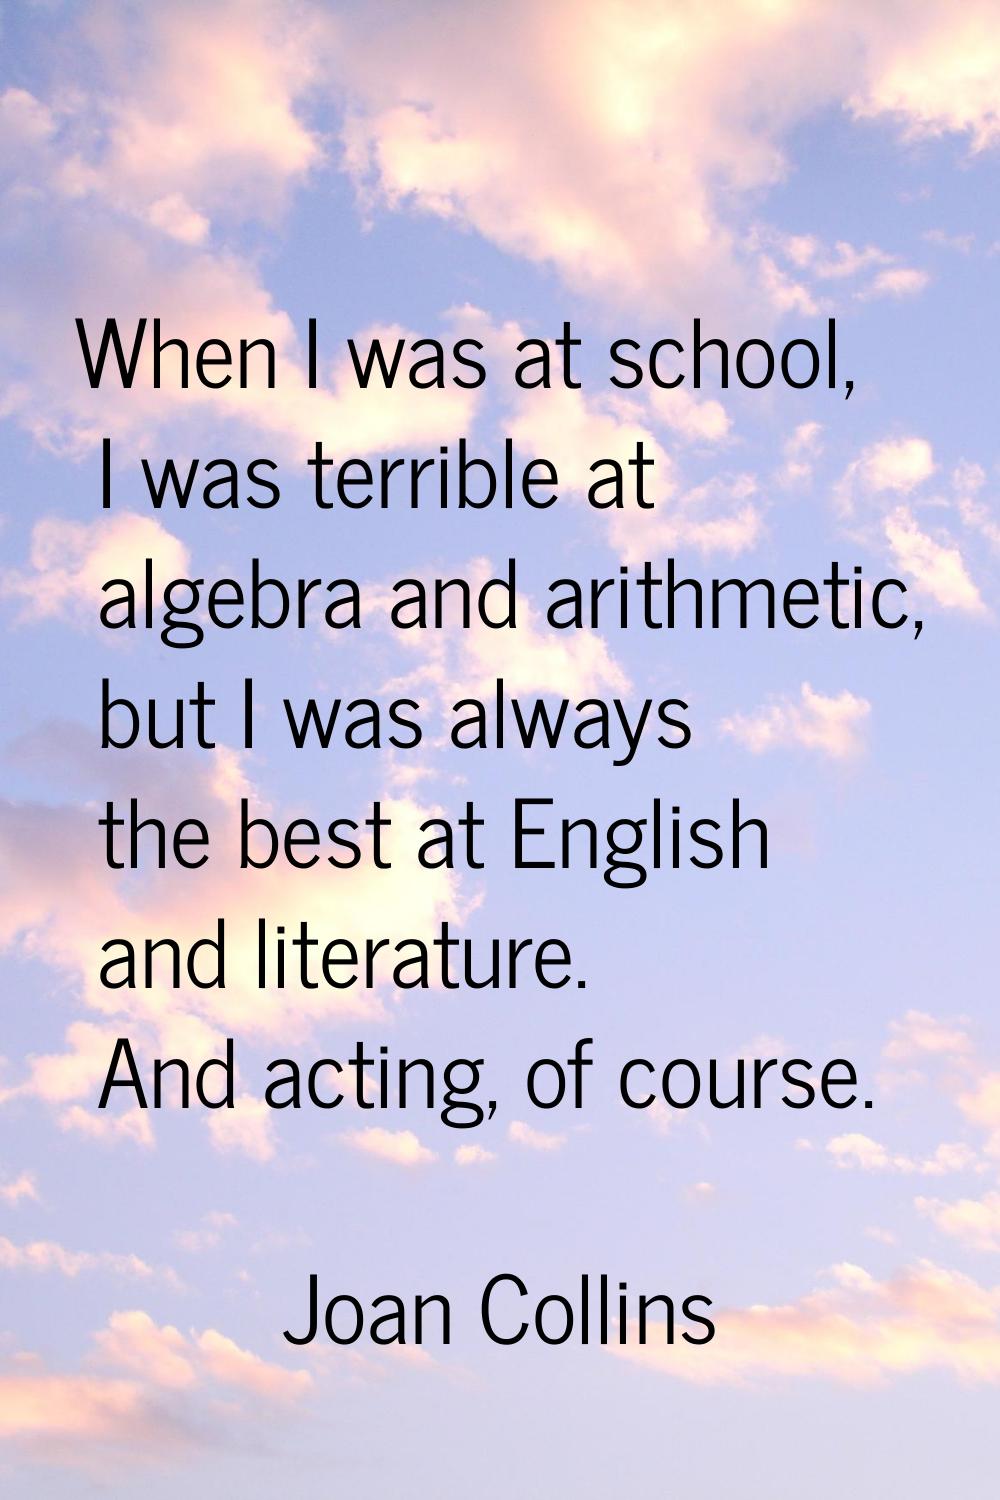 When I was at school, I was terrible at algebra and arithmetic, but I was always the best at Englis